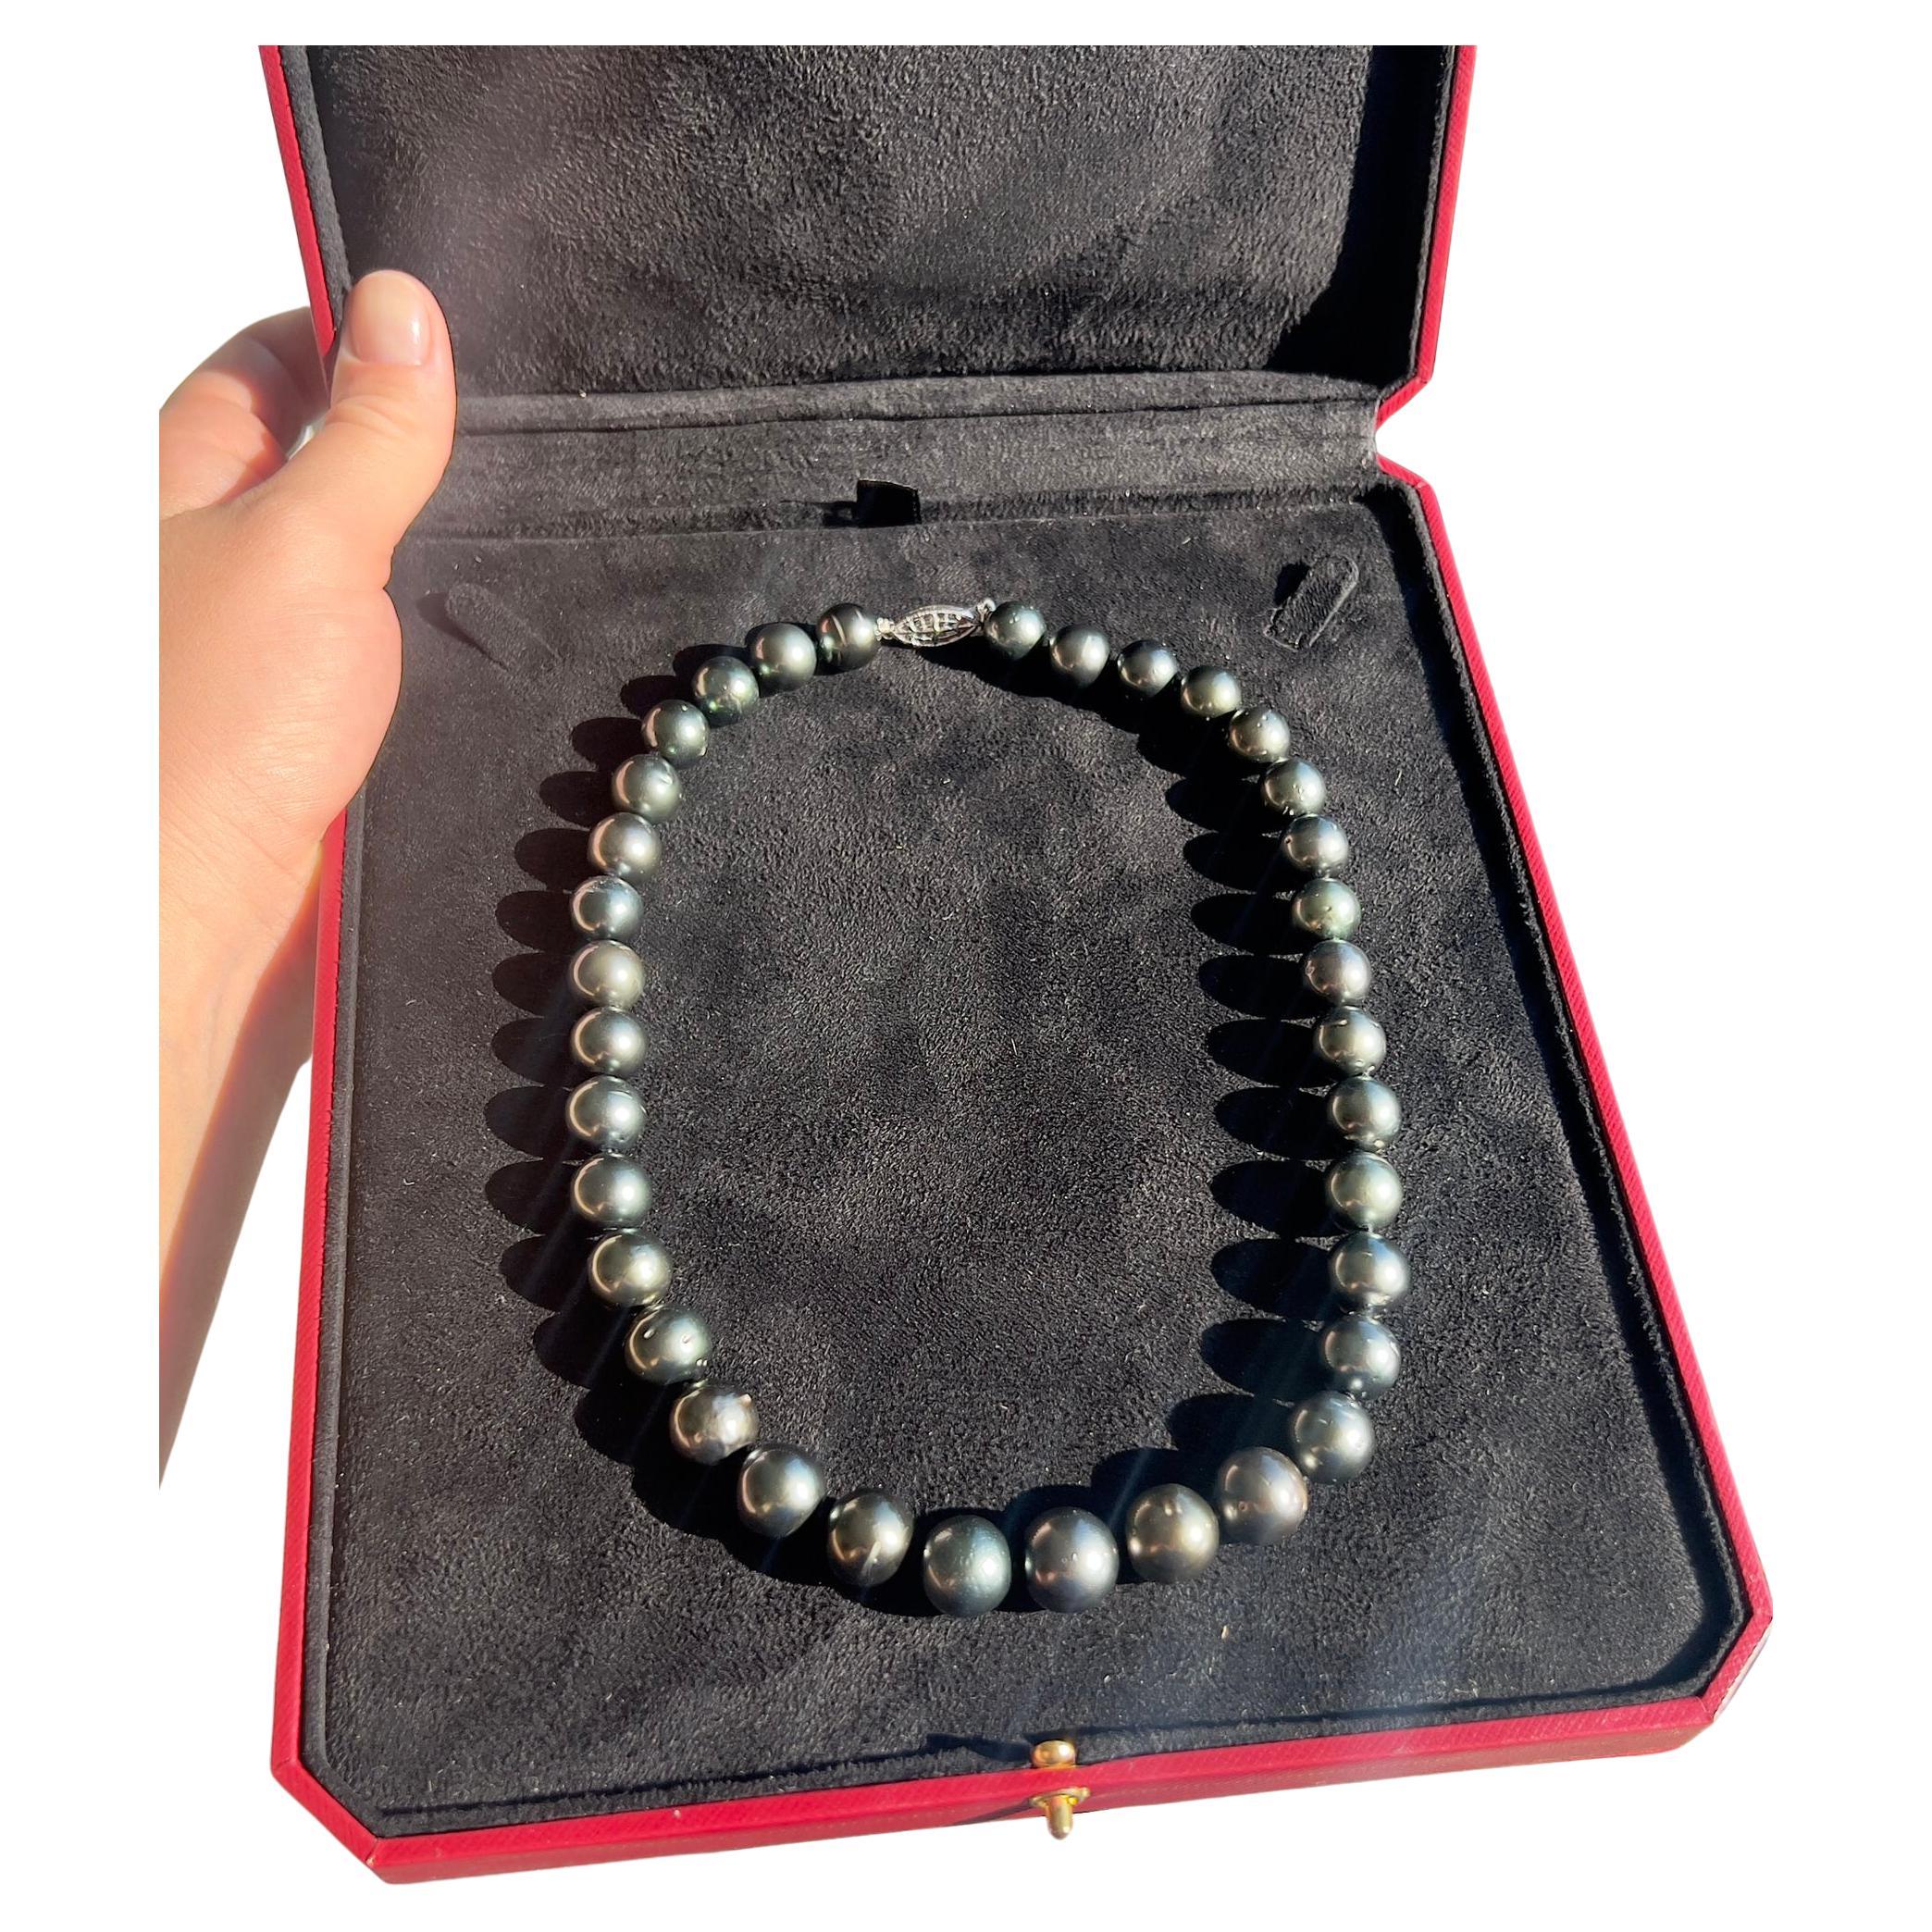 Tahitian Pearl Necklace 11mm-13mm 14K Gold 18 Inches For Sale